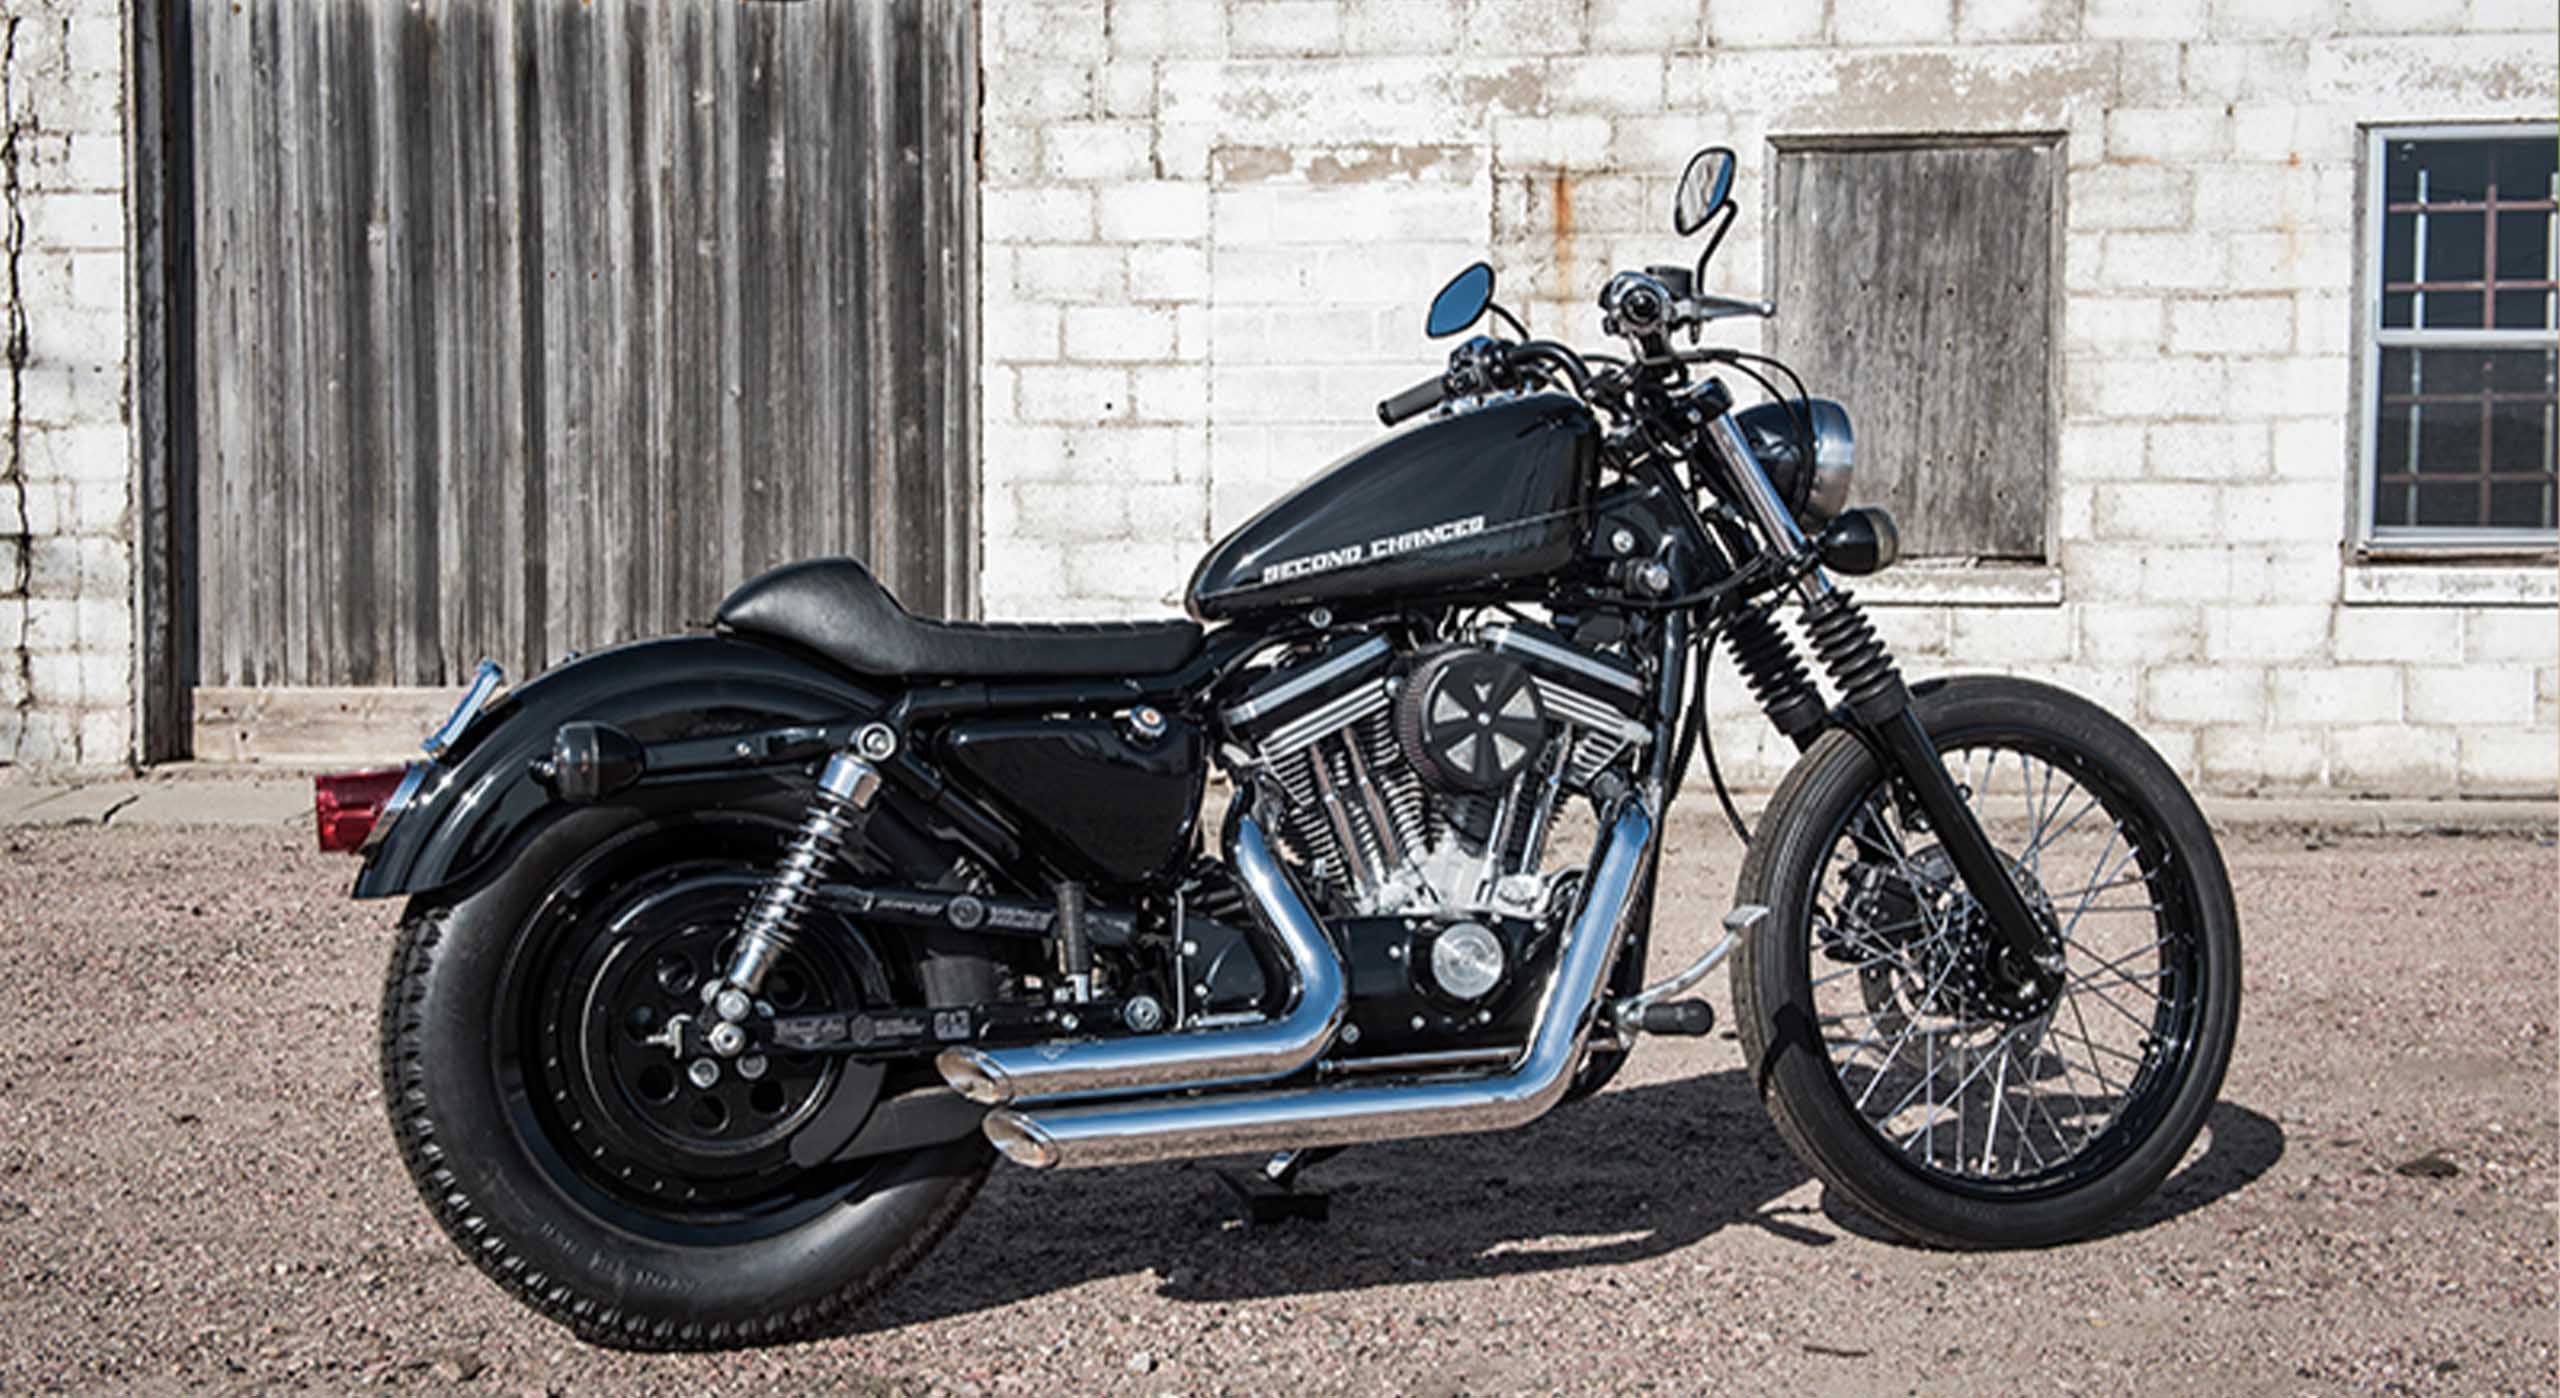 Helping With Horsepower - "Second Chances" Sportster Raffle